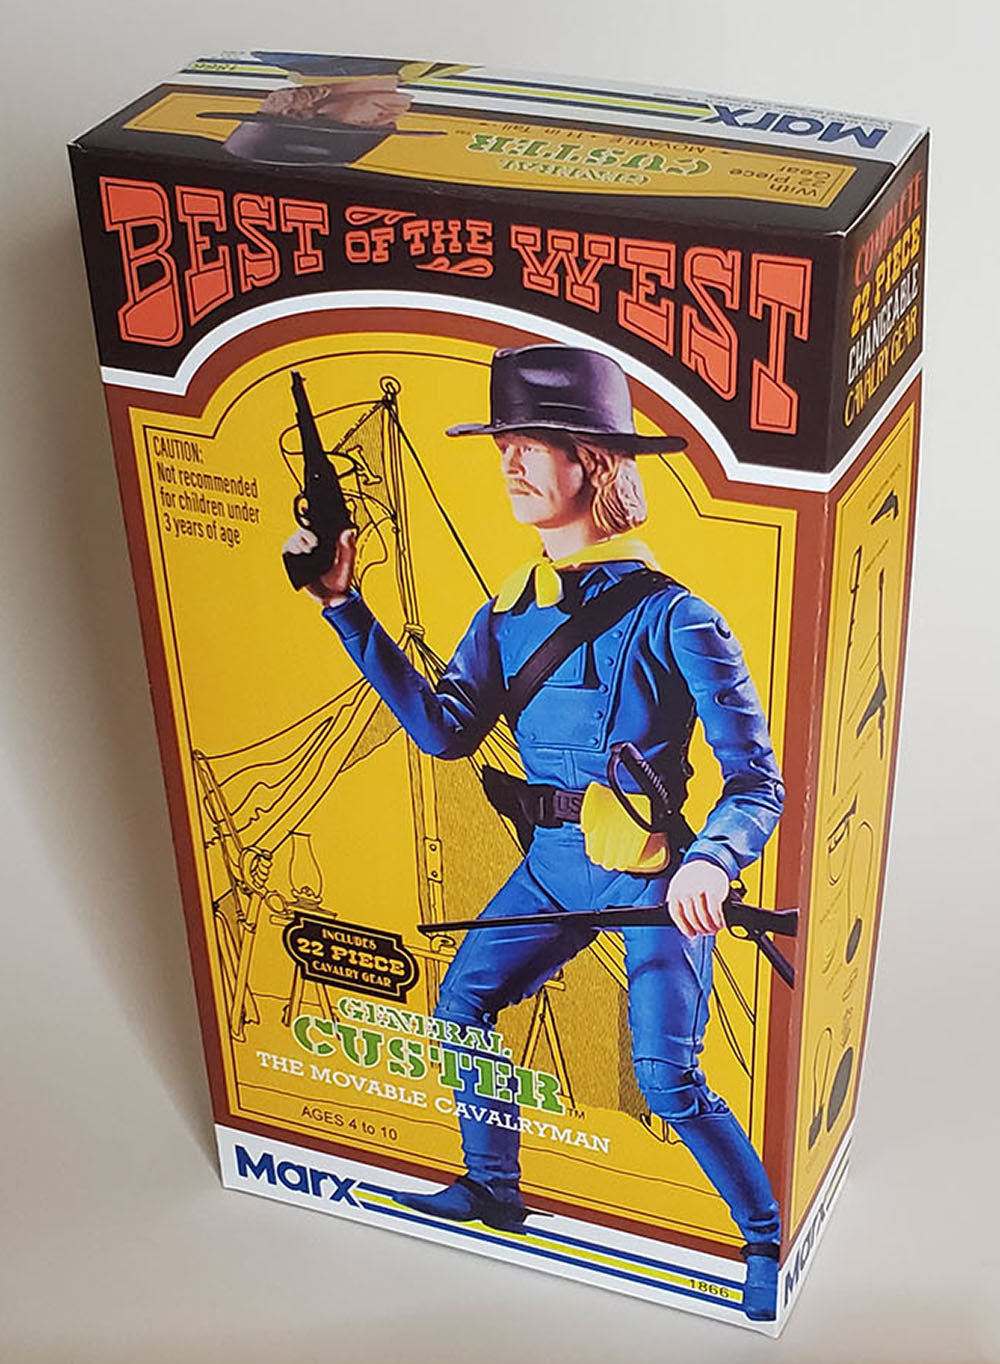 BOTW - General Custer – 4th Edition Reproduction Box (and Manual)